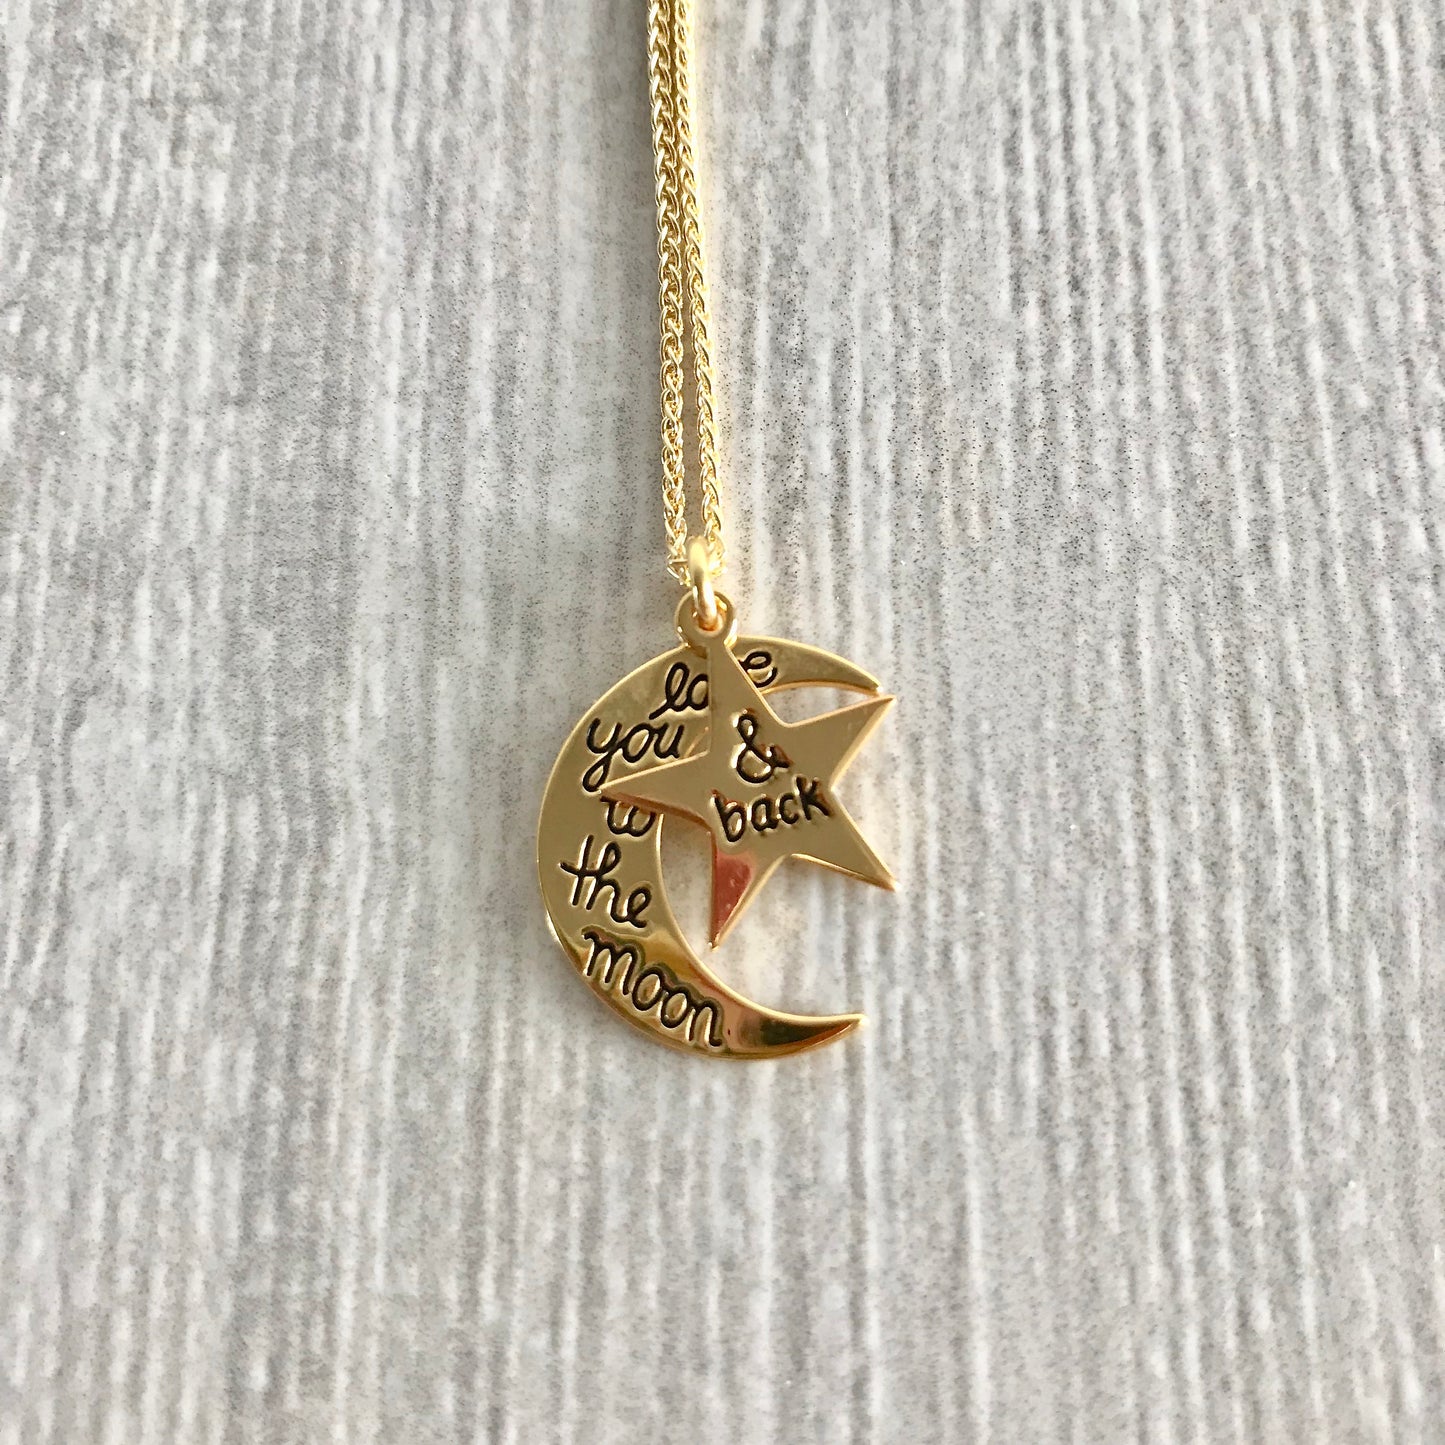 Love you to the moon and back pendant